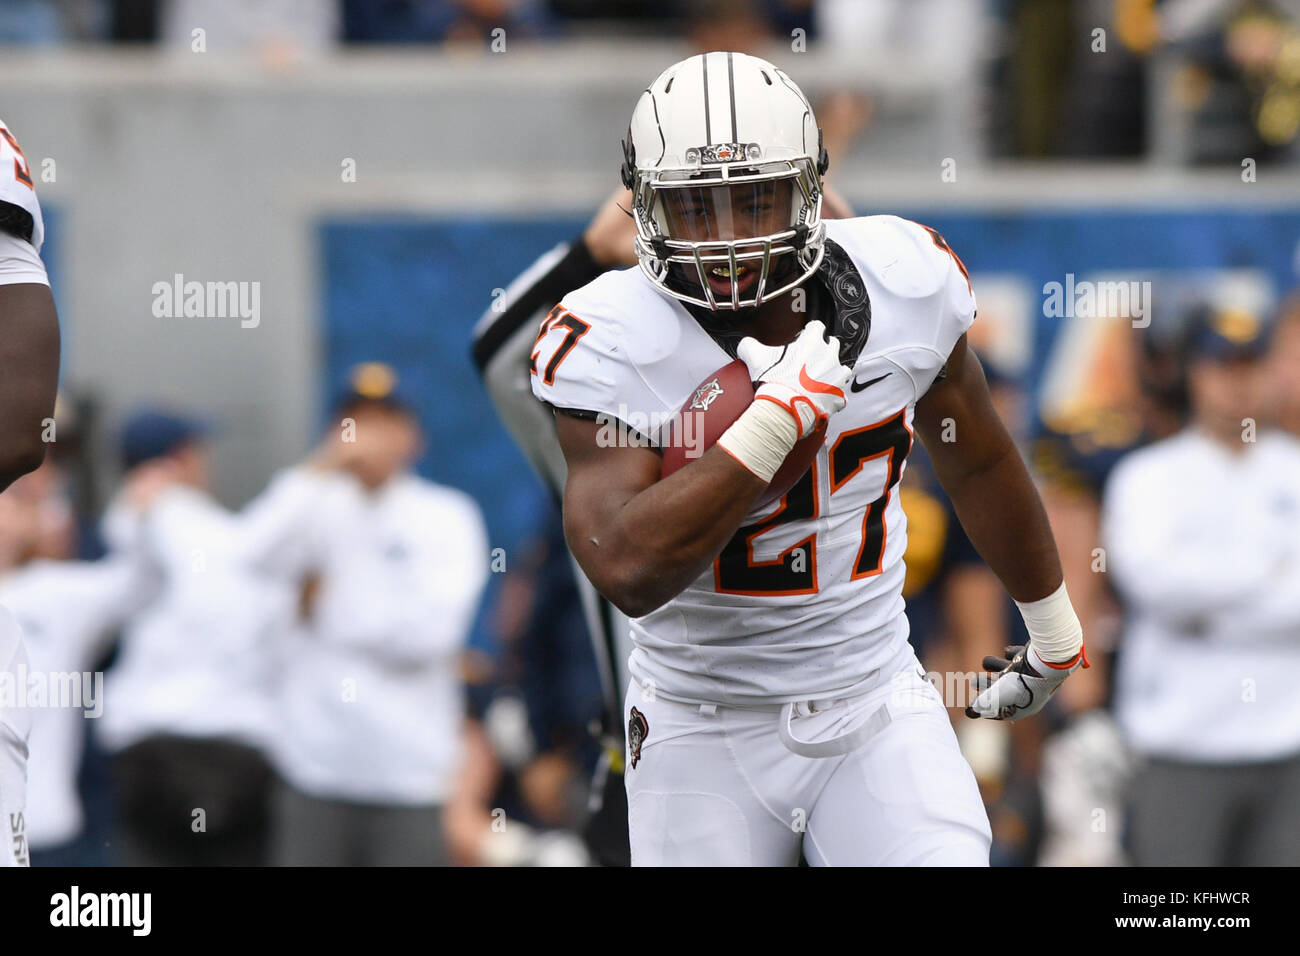 Morgantown, West Virginia, USA. 28th Oct, 2017. Oklahoma State Cowboys running back J.D. KING (27) runs with the ball during a game played at Mountaineer Field in Morgantown, WV. Oklahoma State beat WVU 50-39. Credit: Ken Inness/ZUMA Wire/Alamy Live News Stock Photo